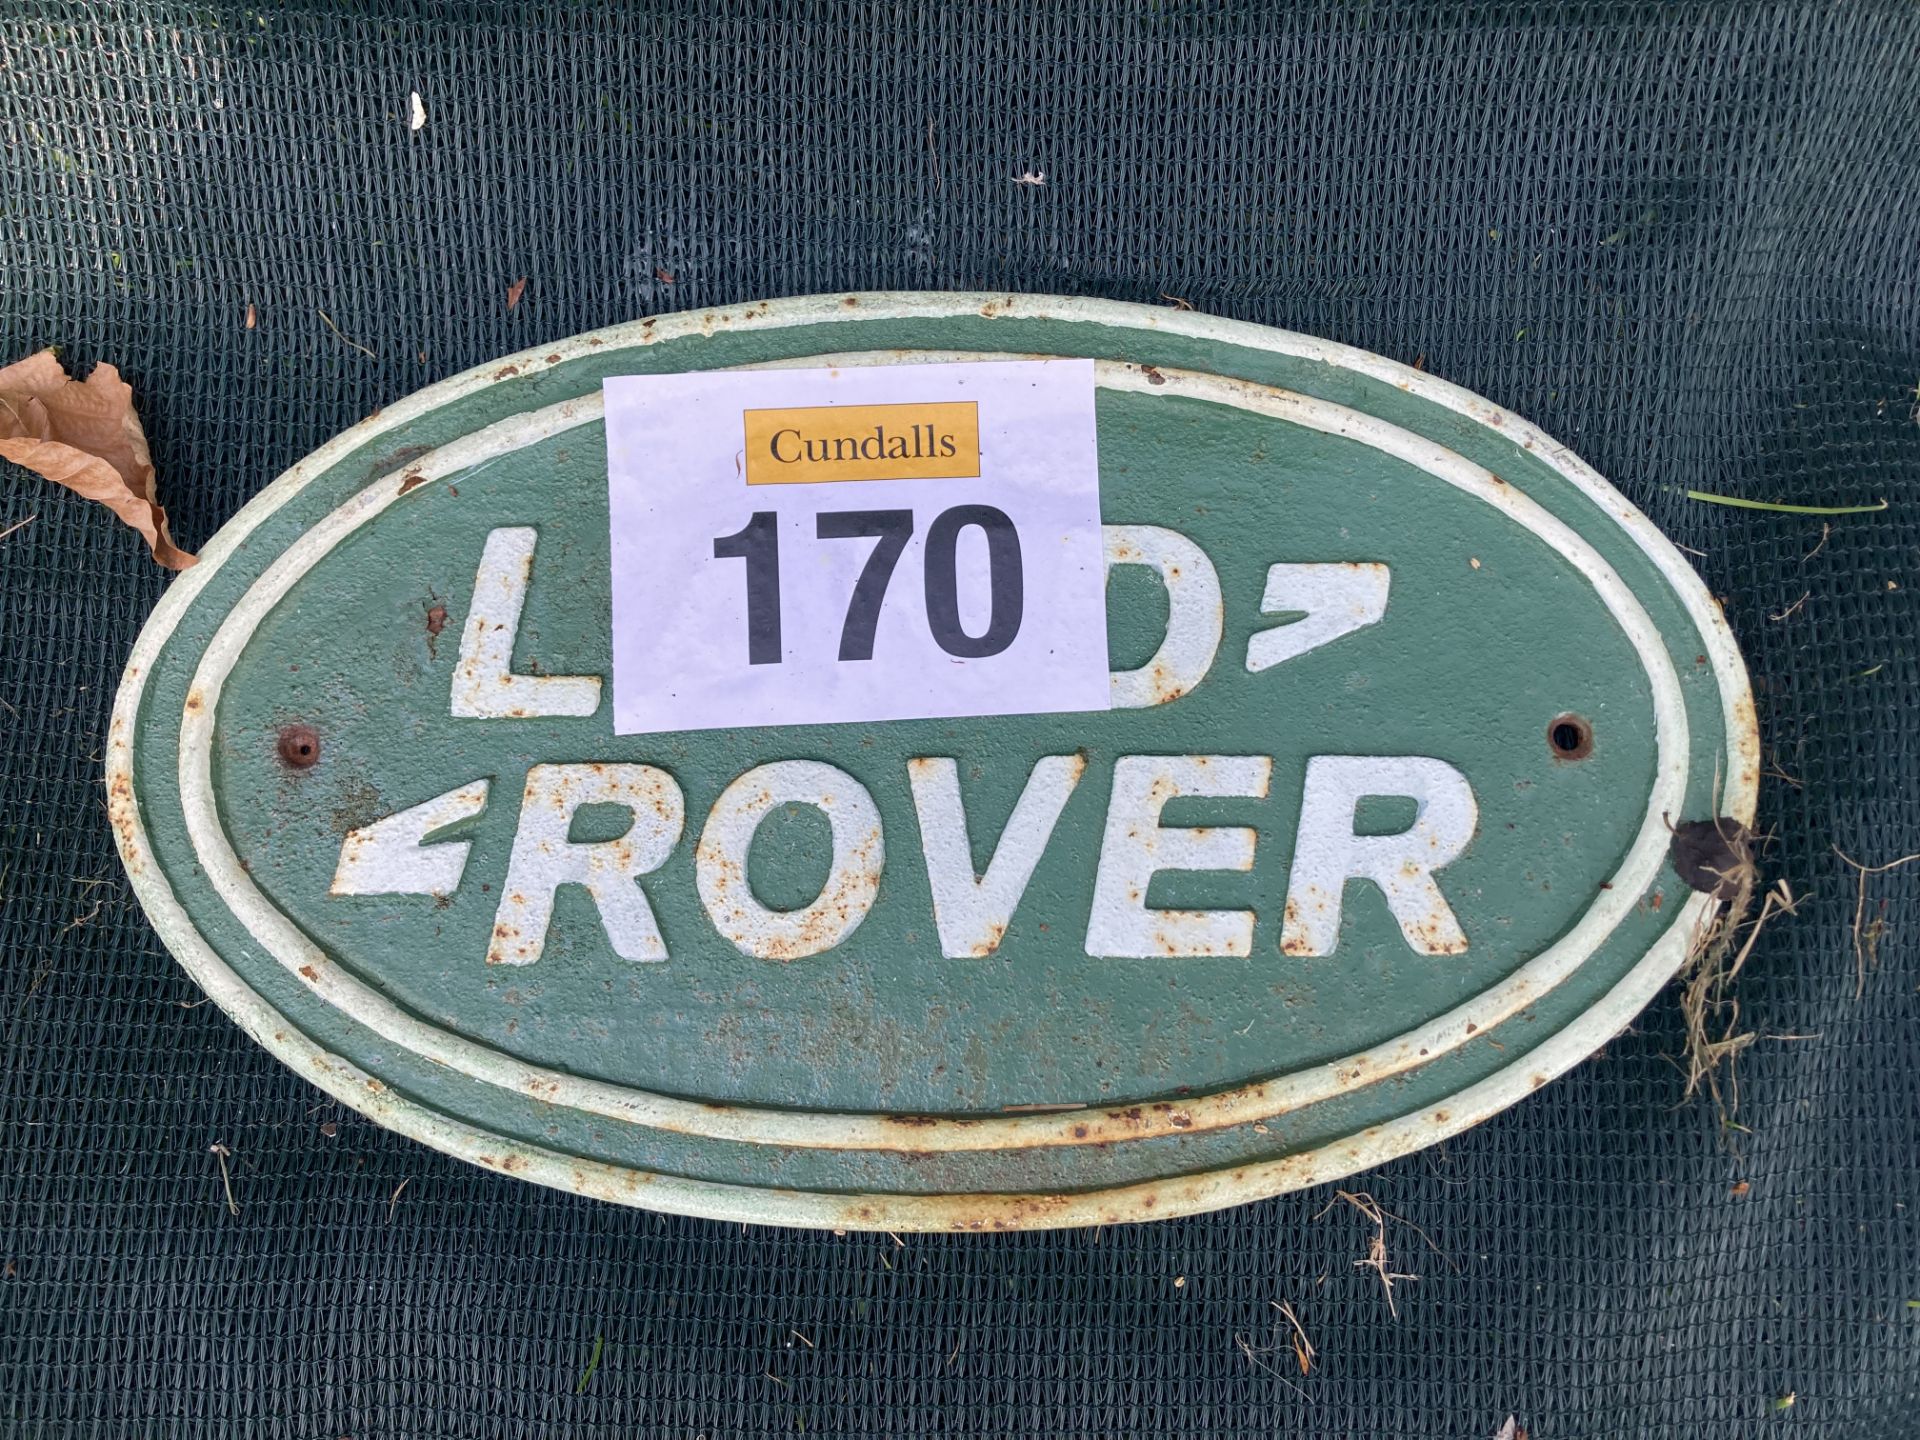 LANDROVER SIGN